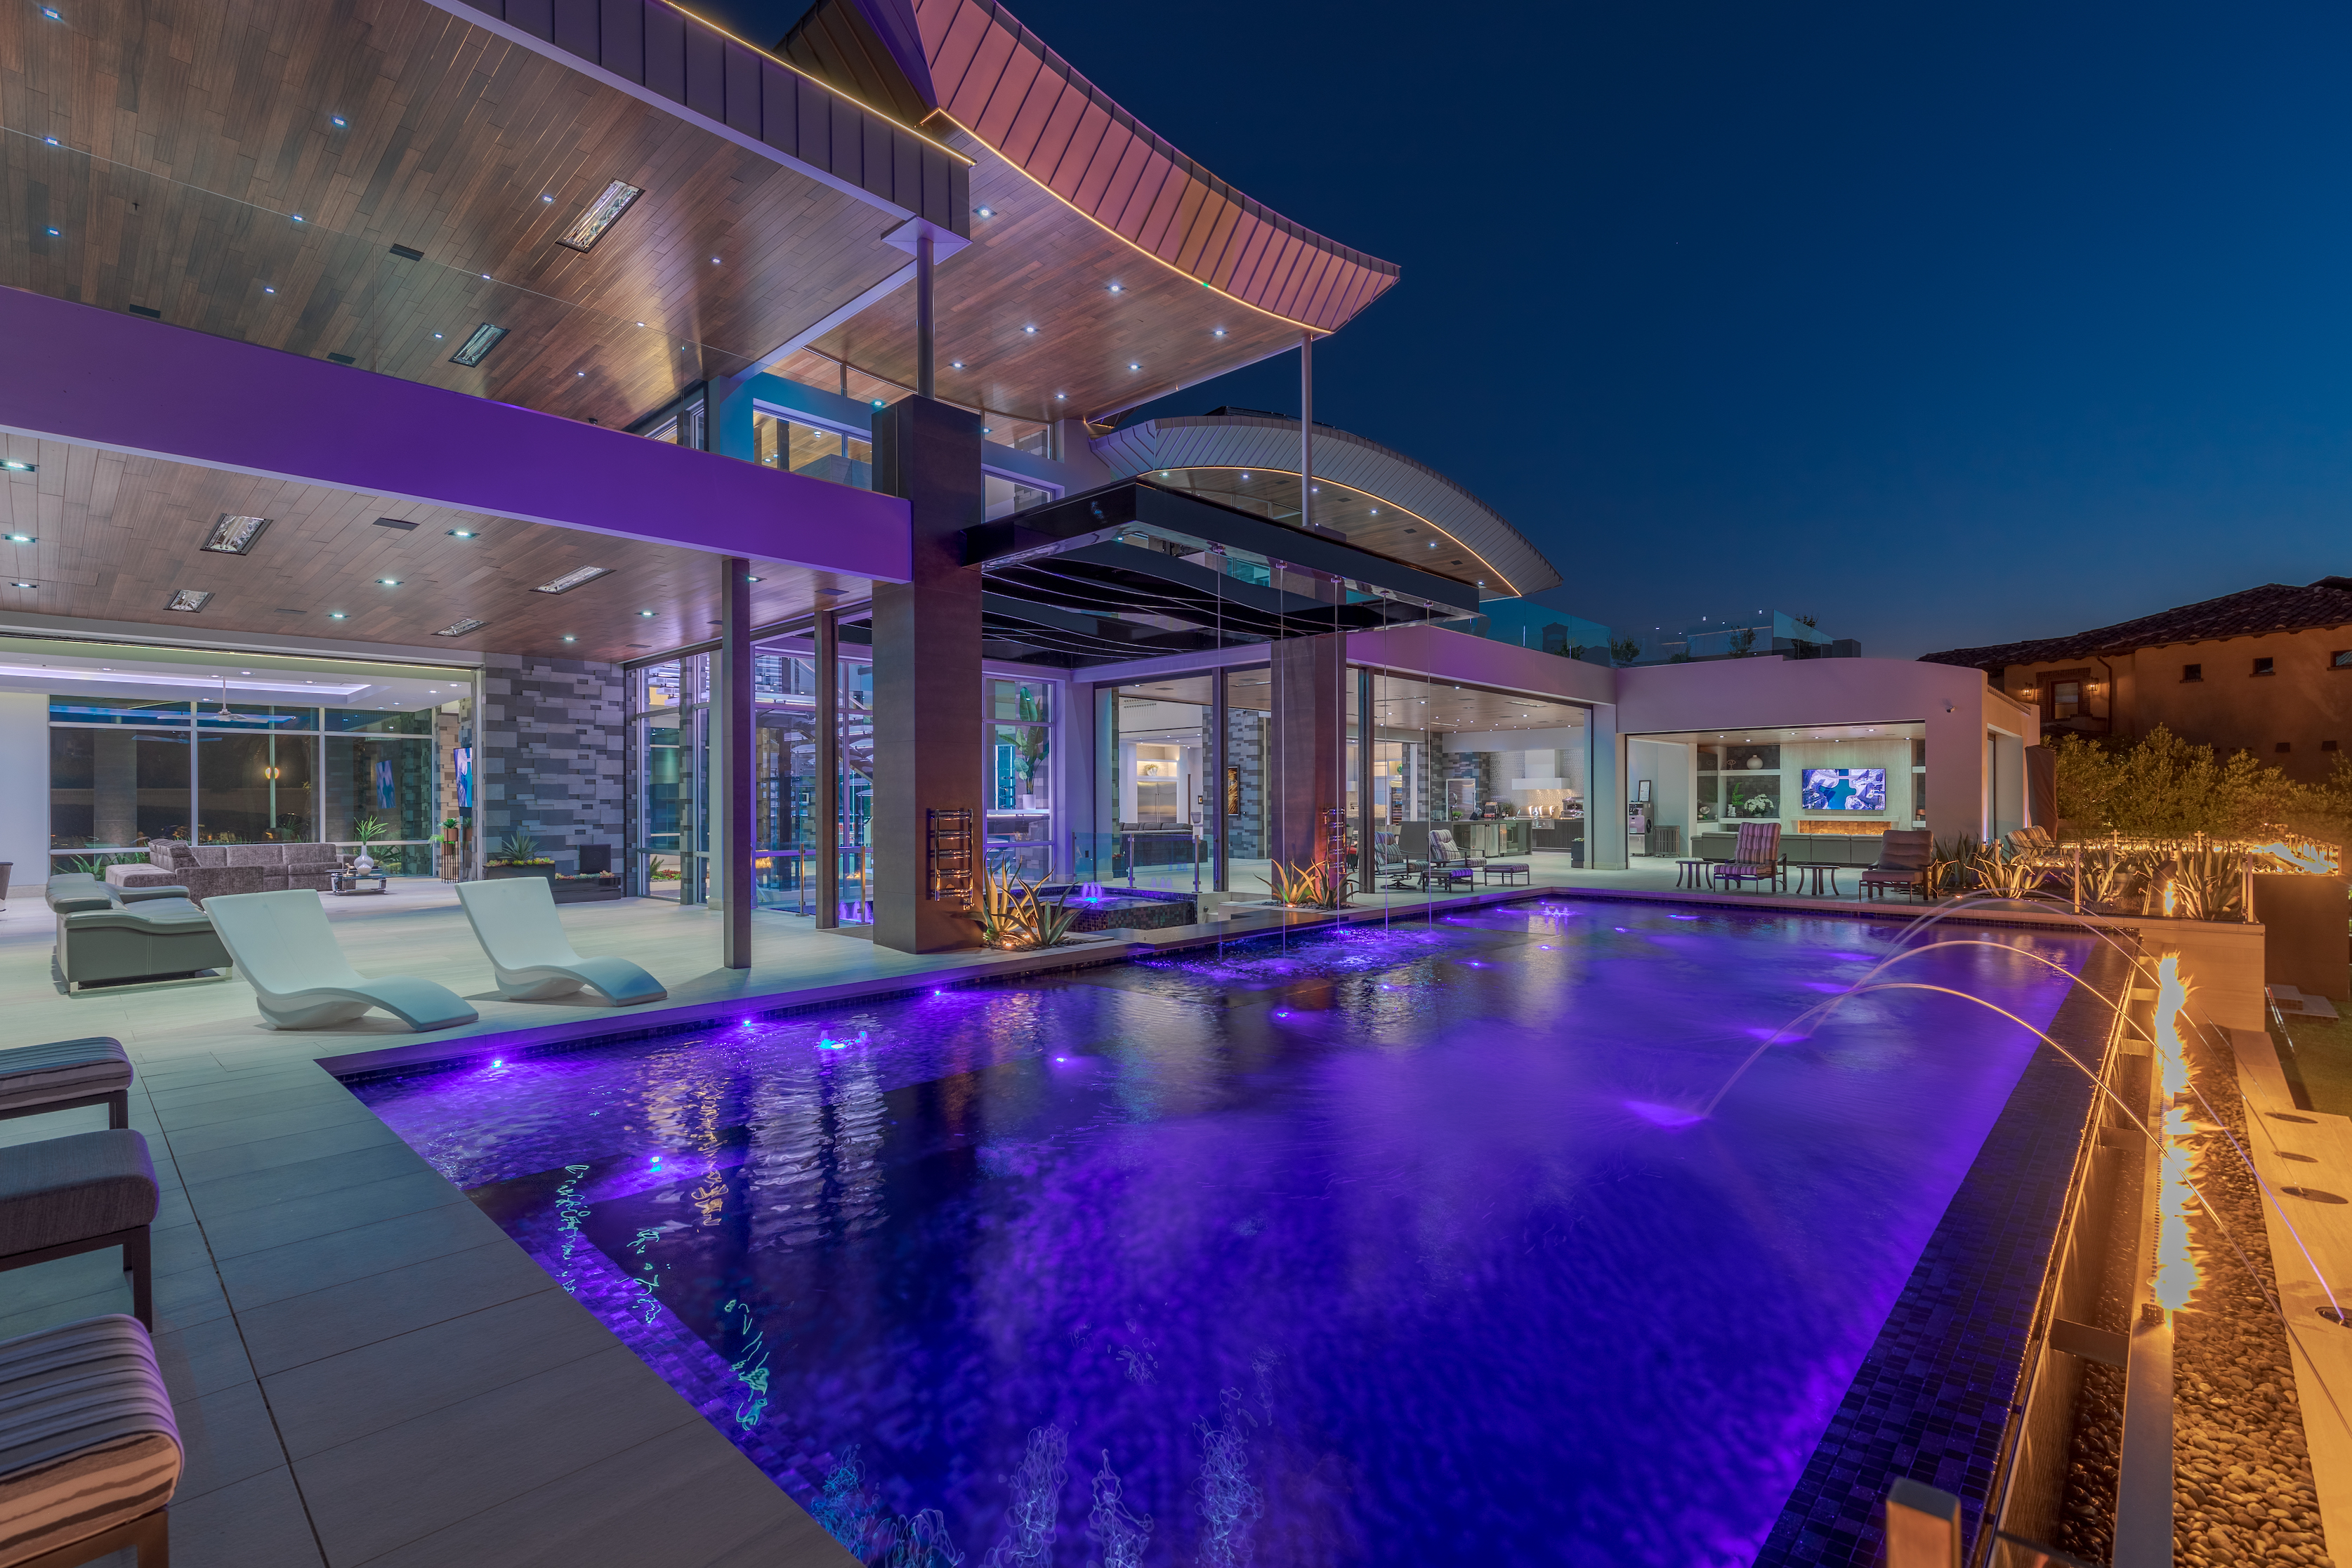 LED-lit pool at night with parallel fireplace.